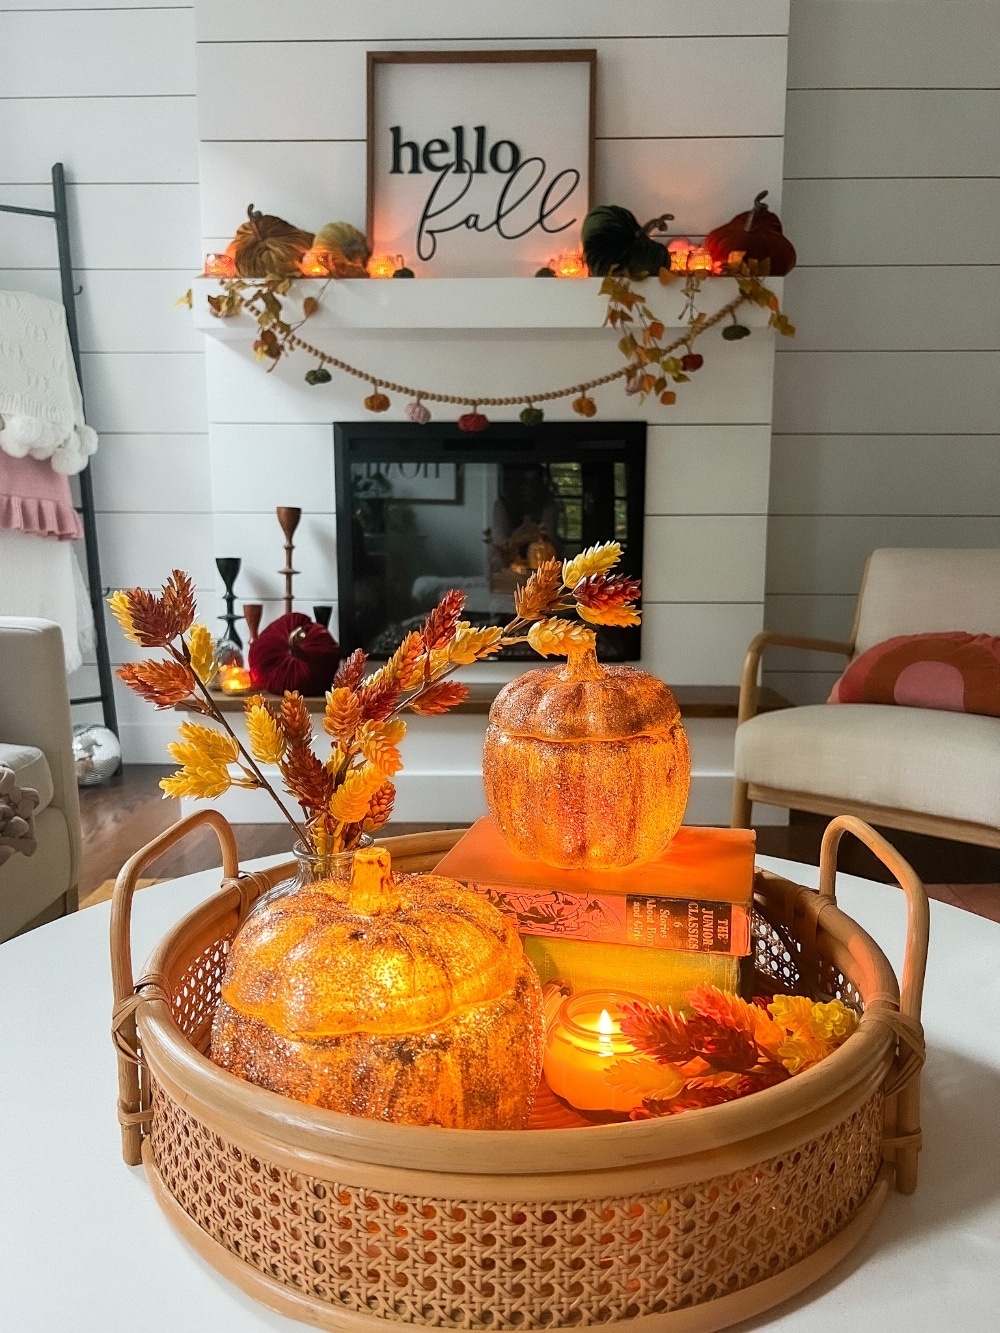 Pottery Barn Inspired Amber Pumpkin Cloches. Turn inexpensive glass pumpkin containers into high end looking cloches by painting and adding glitter! 